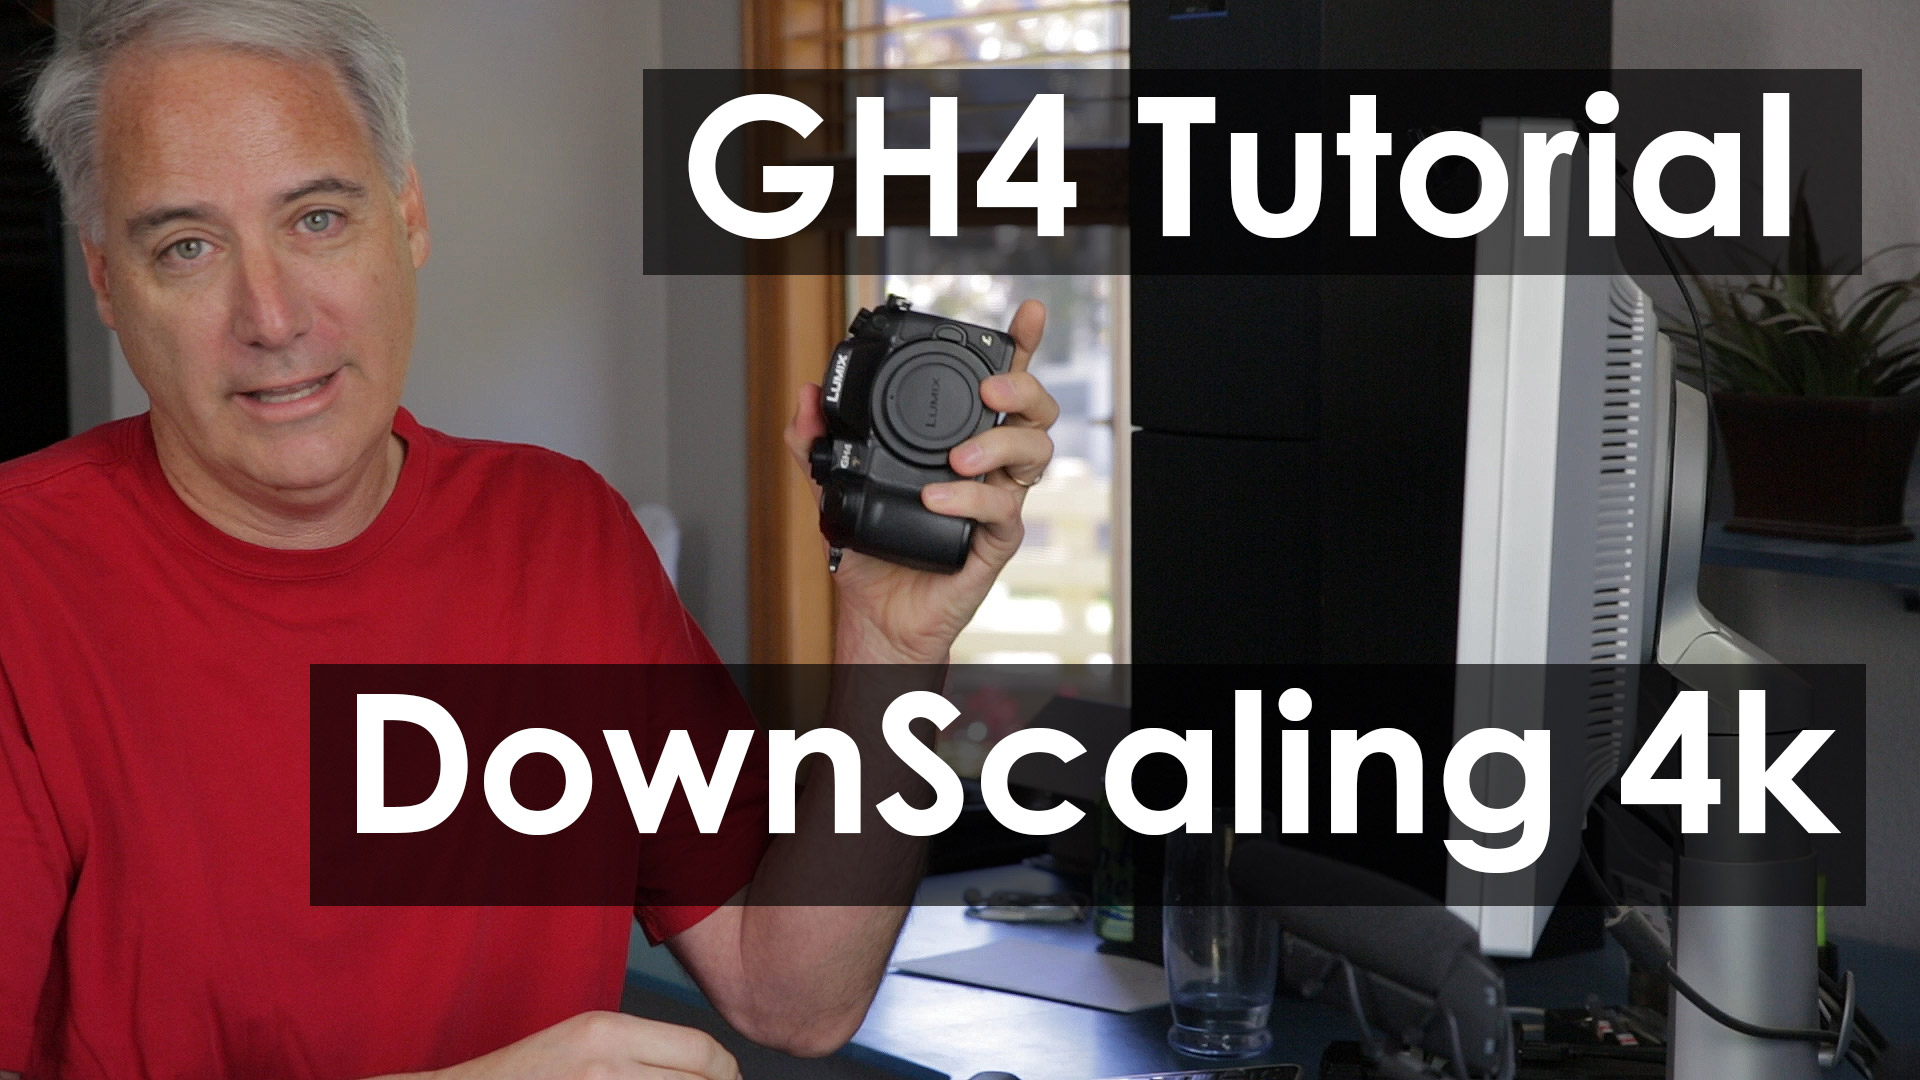 GH4 Tutorial Downscaling 4k Footage to 1080 | Downscaling 4k ...